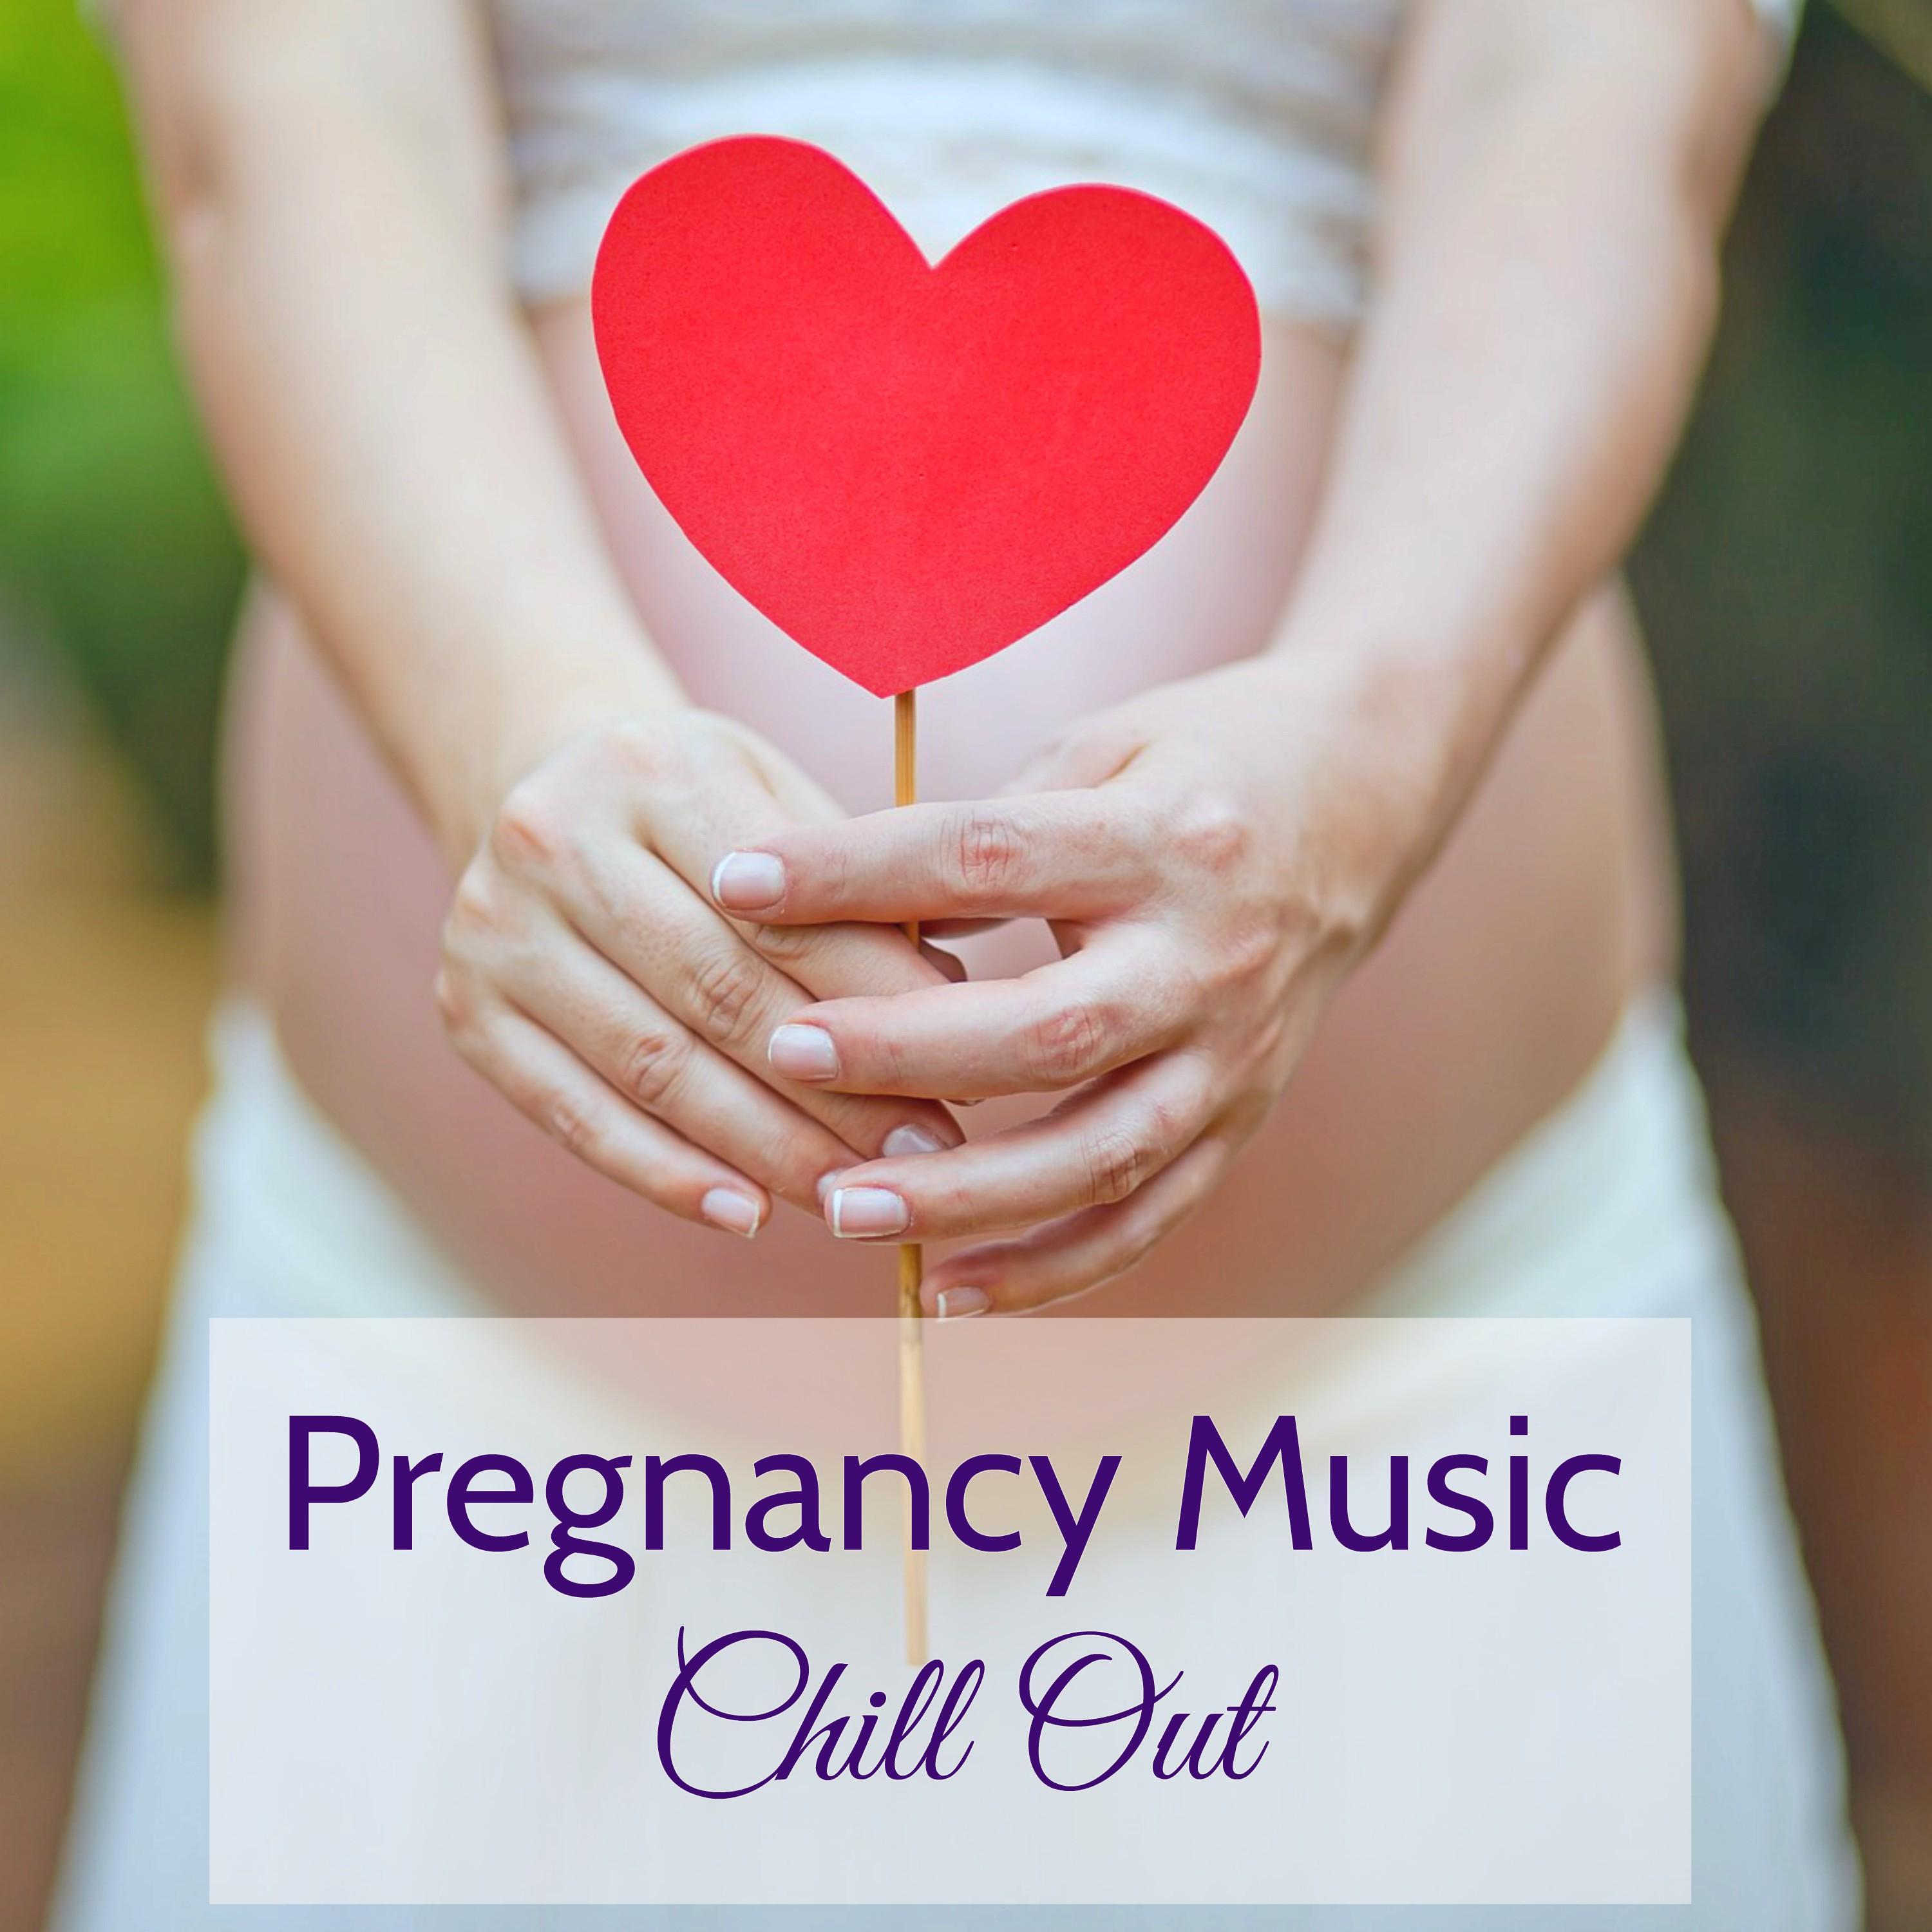 All I Need is Love (Pregnancy Music)